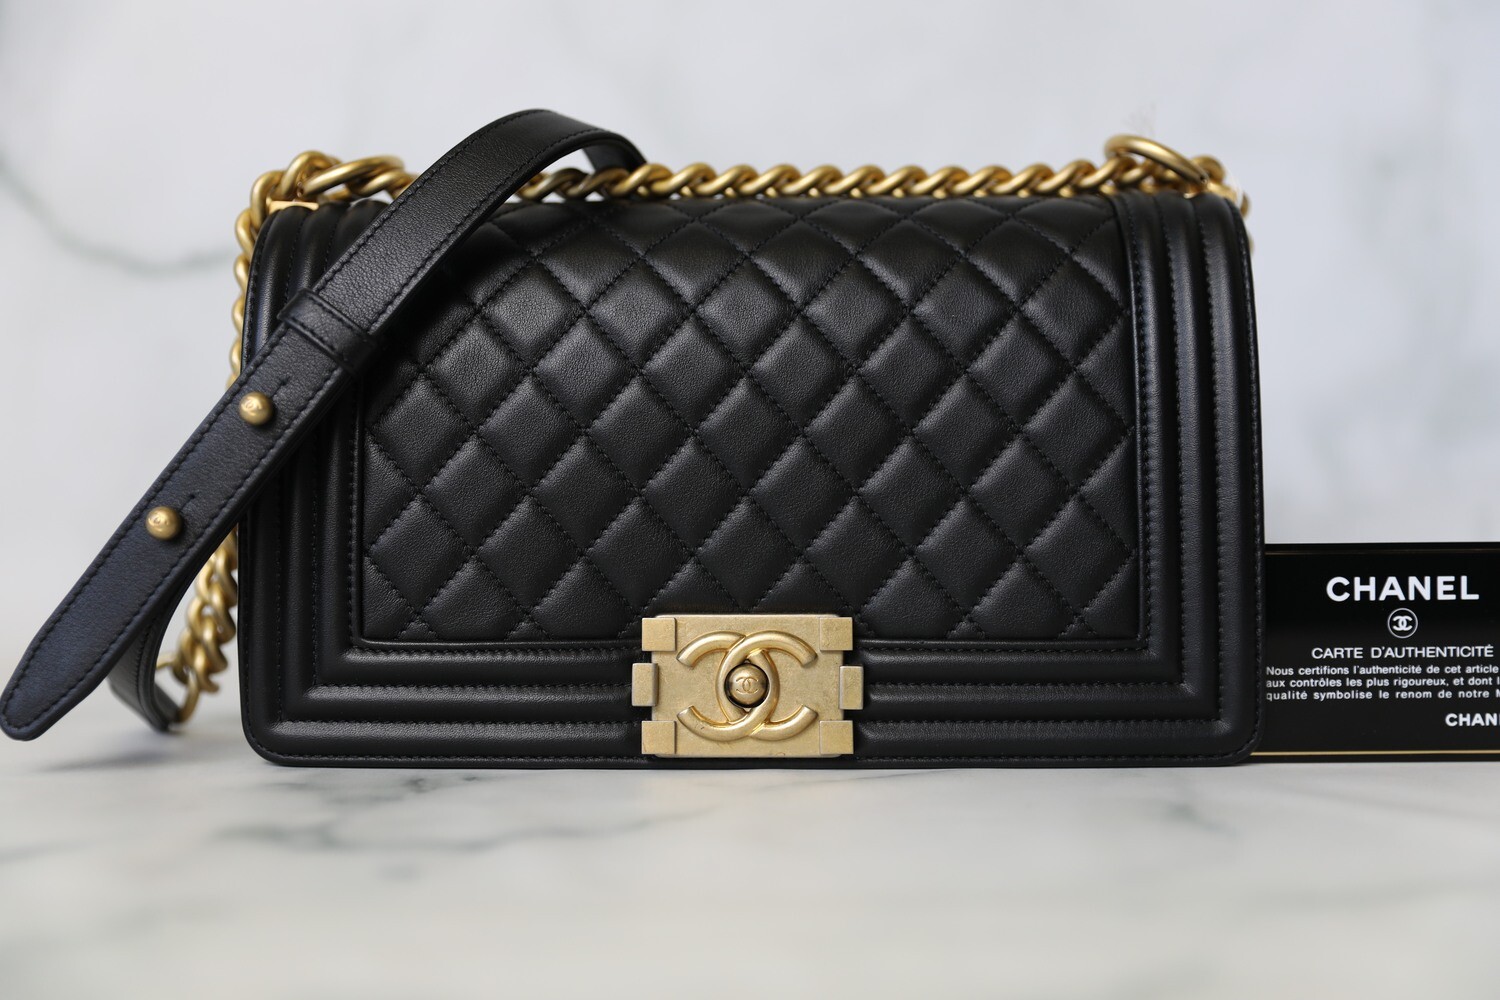 Chanel Boy Bag Reveal and Review! 